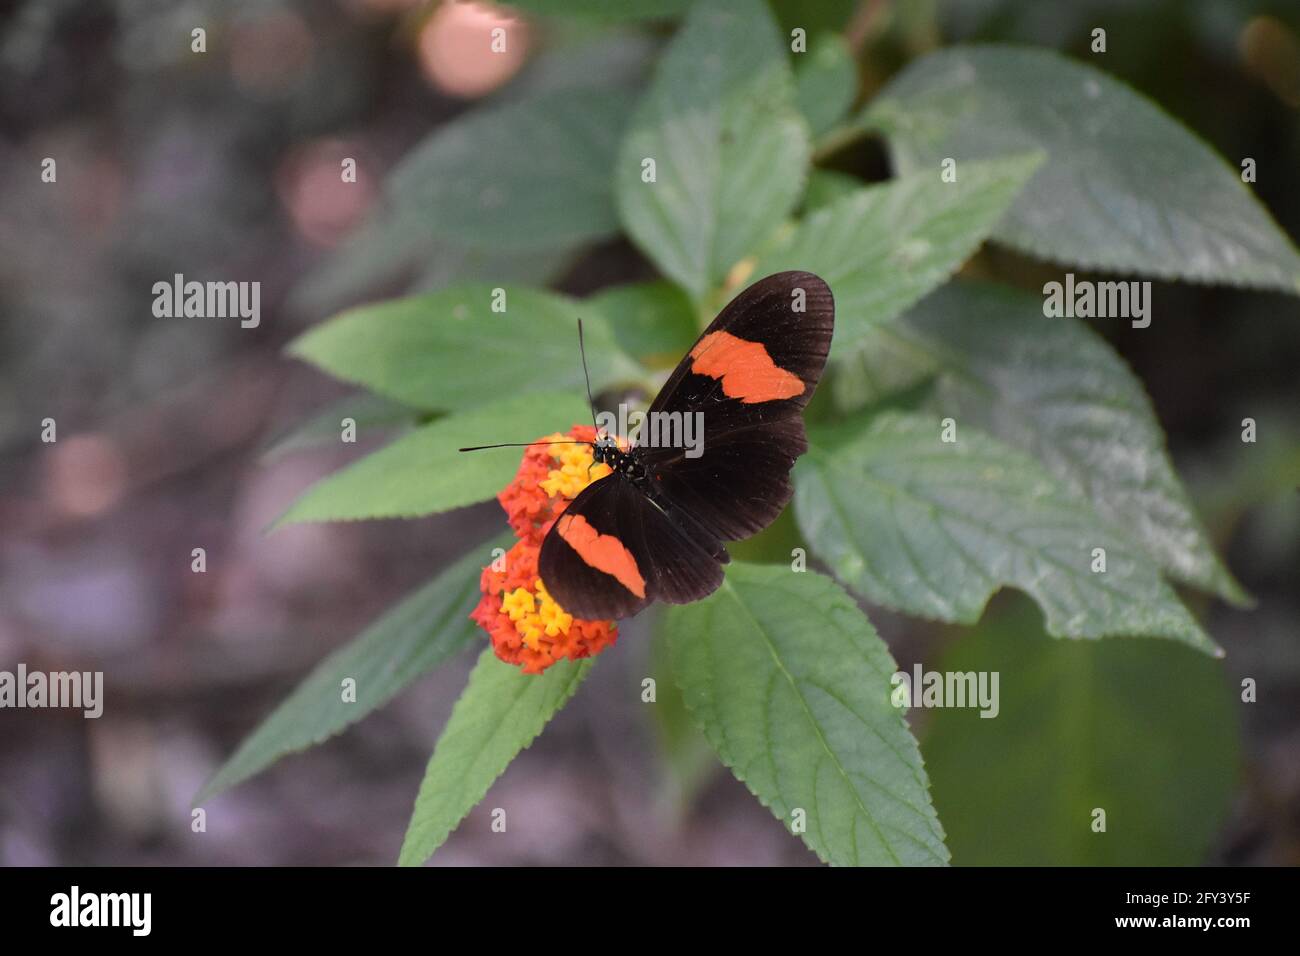 Heliconius melpomene, commonly known as the postman butterfly. Stock Photo